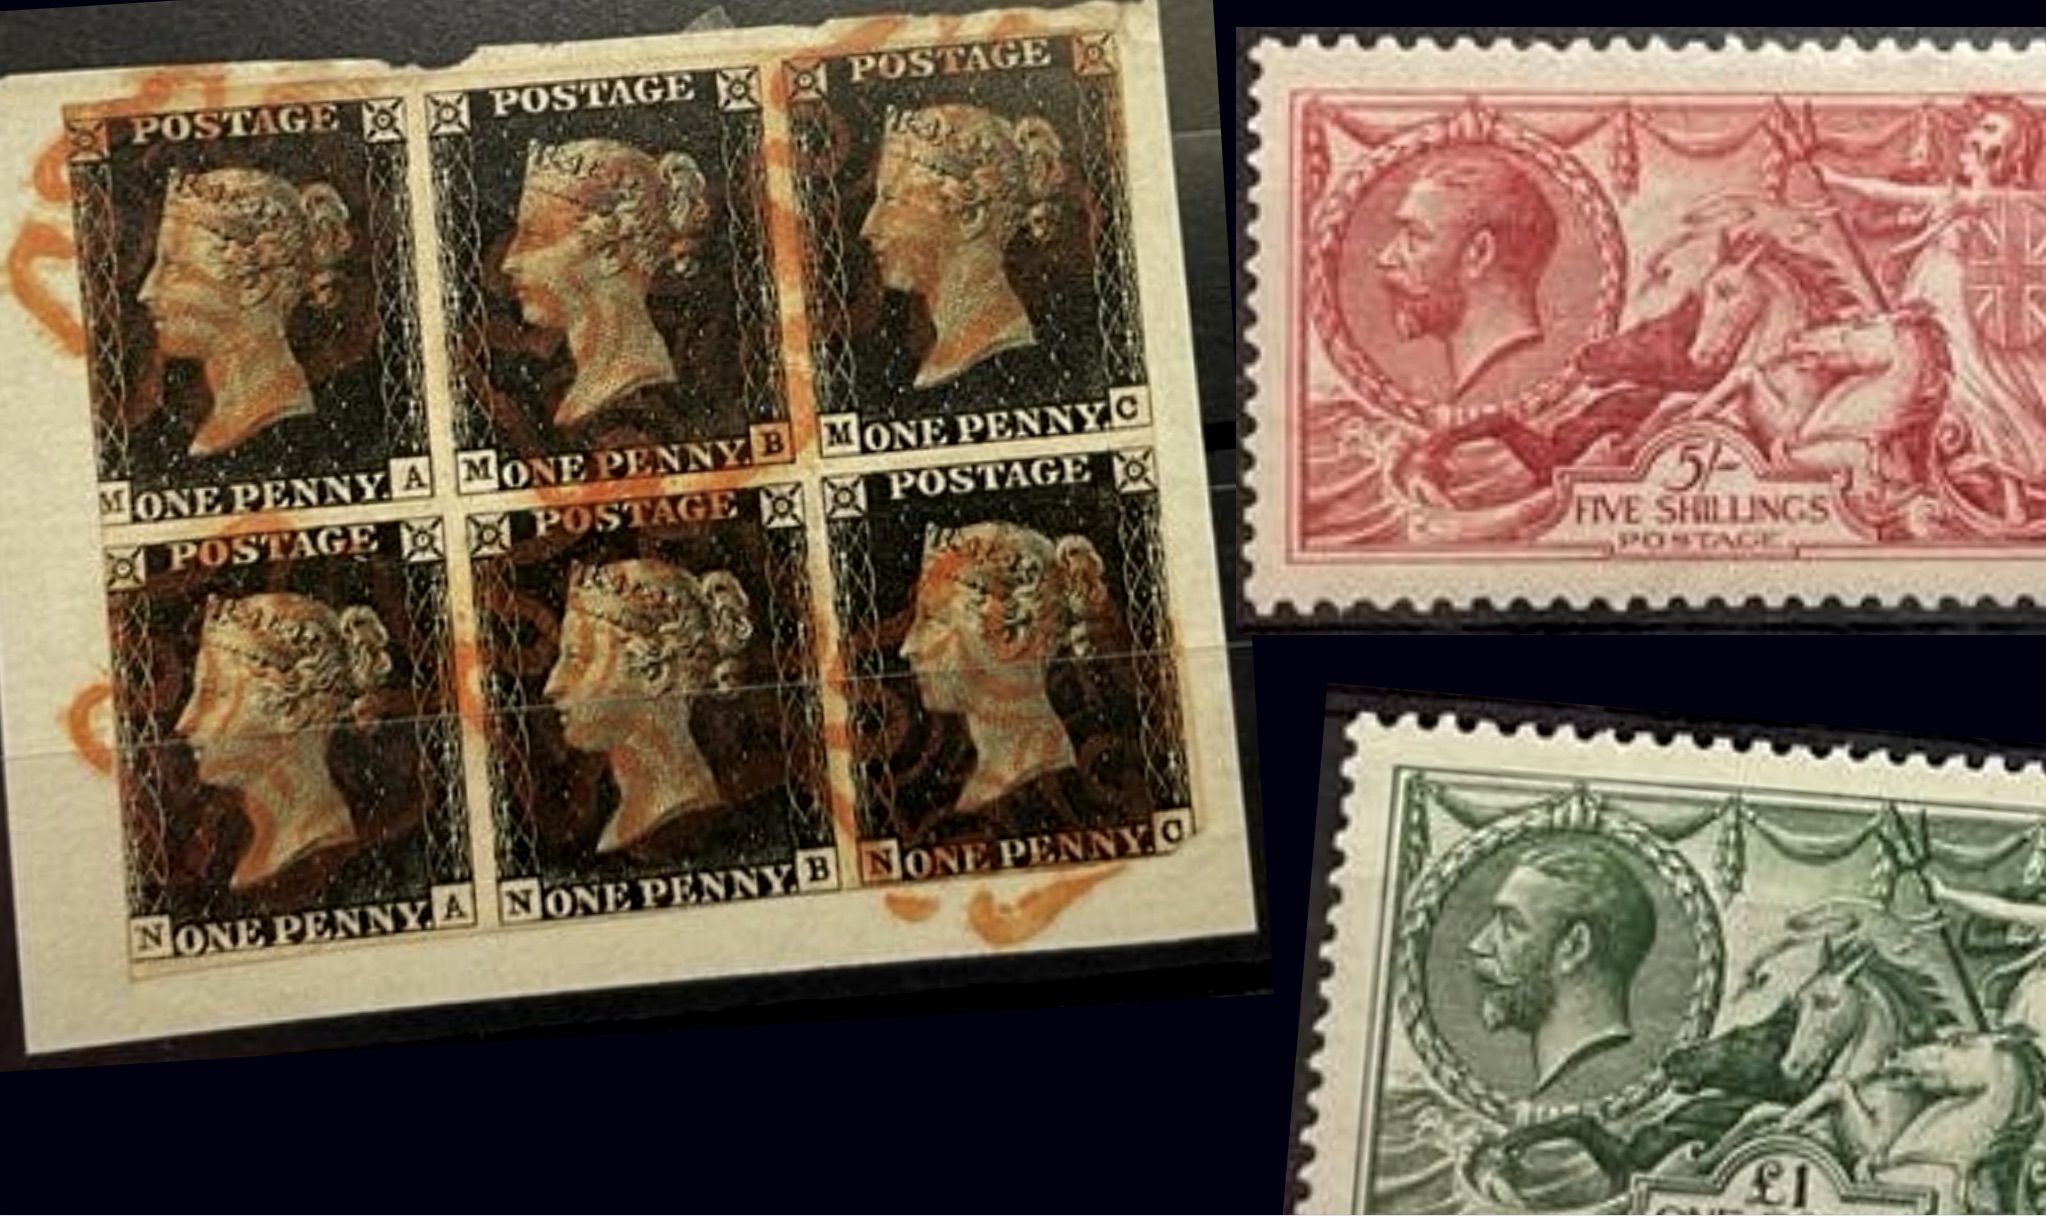 Collection of rare and valuable postage stamps in sale - Antique